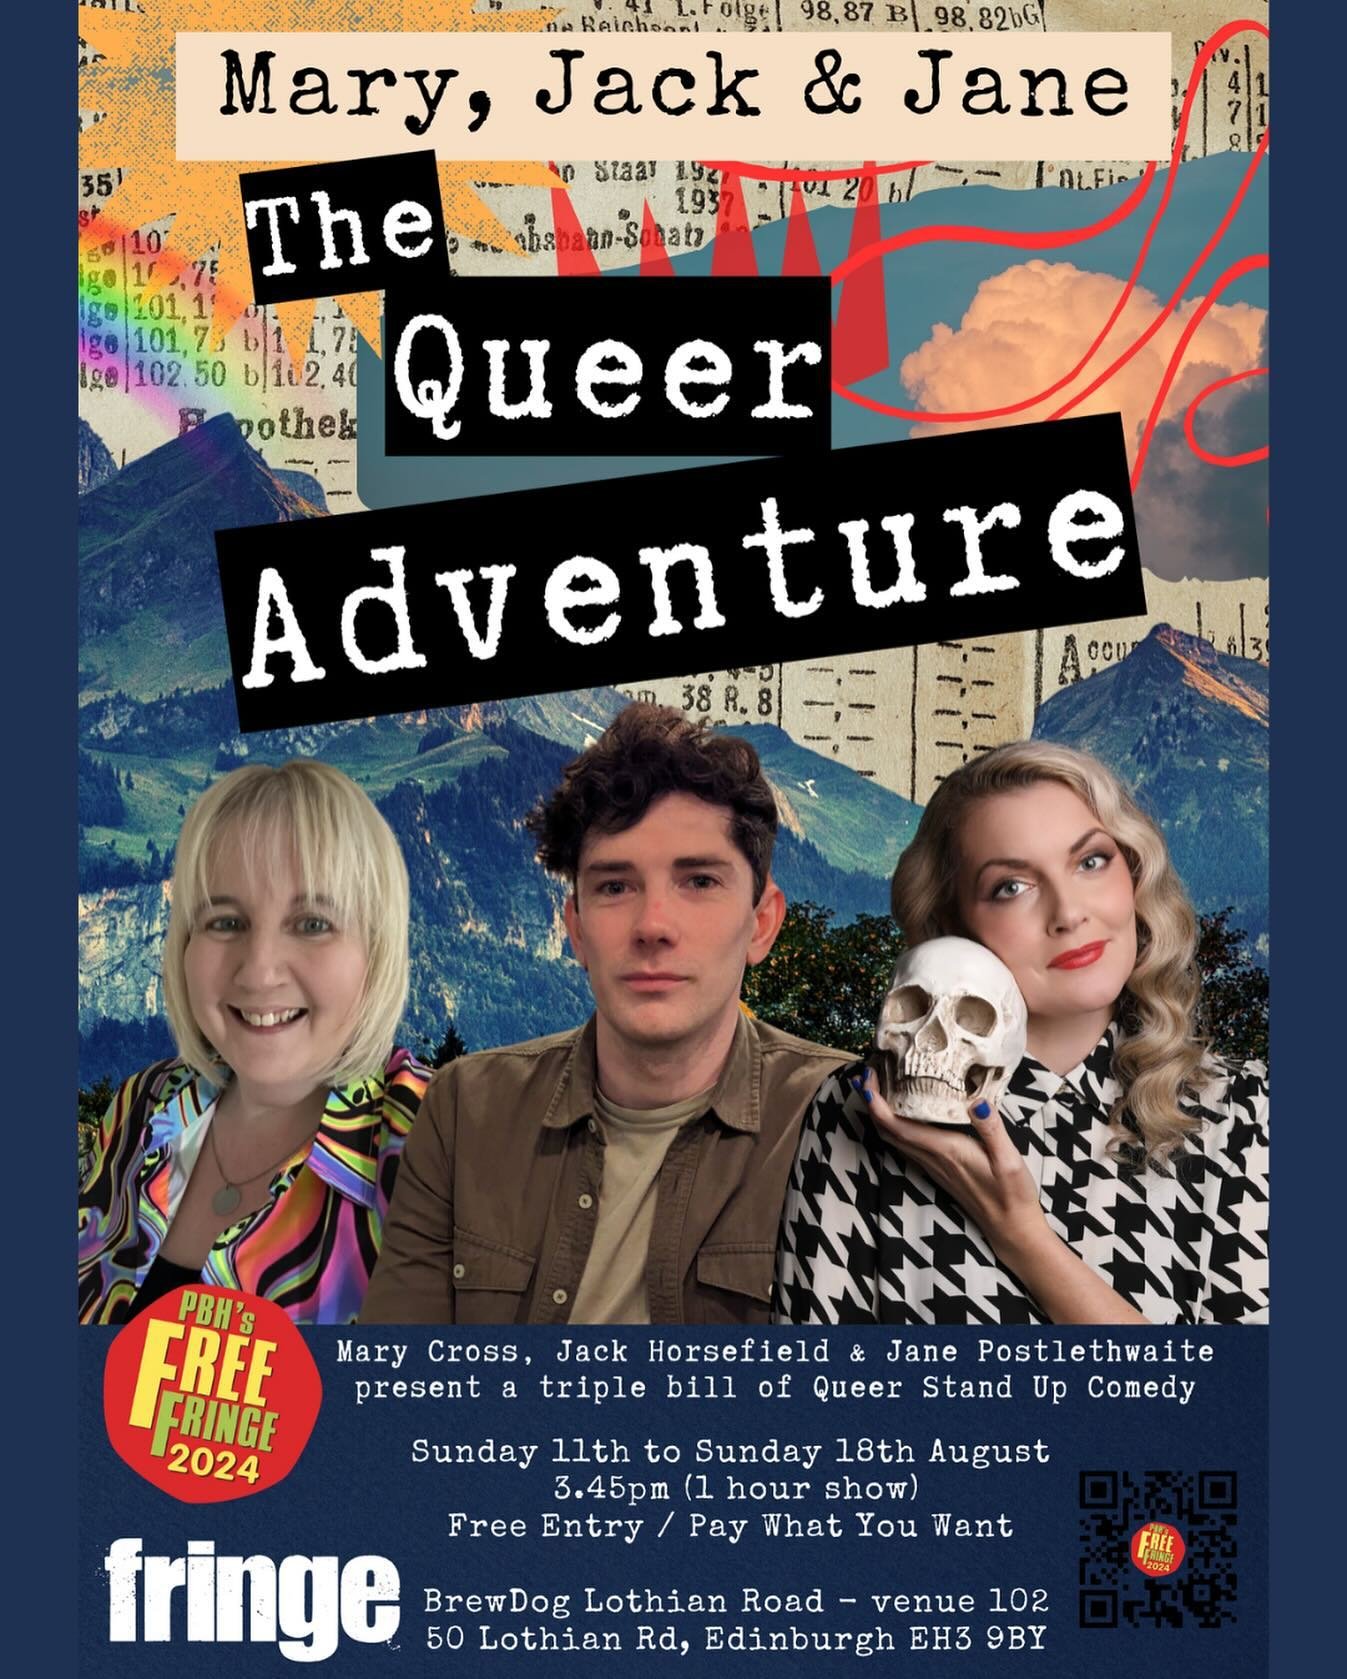 Can&rsquo;t wait to be back at @edfringe and this time sharing an hour with @marygcross and @horsefield_jack It will be a split hour of stand up comedy with @thefreefringe from 11-18th August at 3.45pm (one hour show). Come stop by if you&rsquo;re in